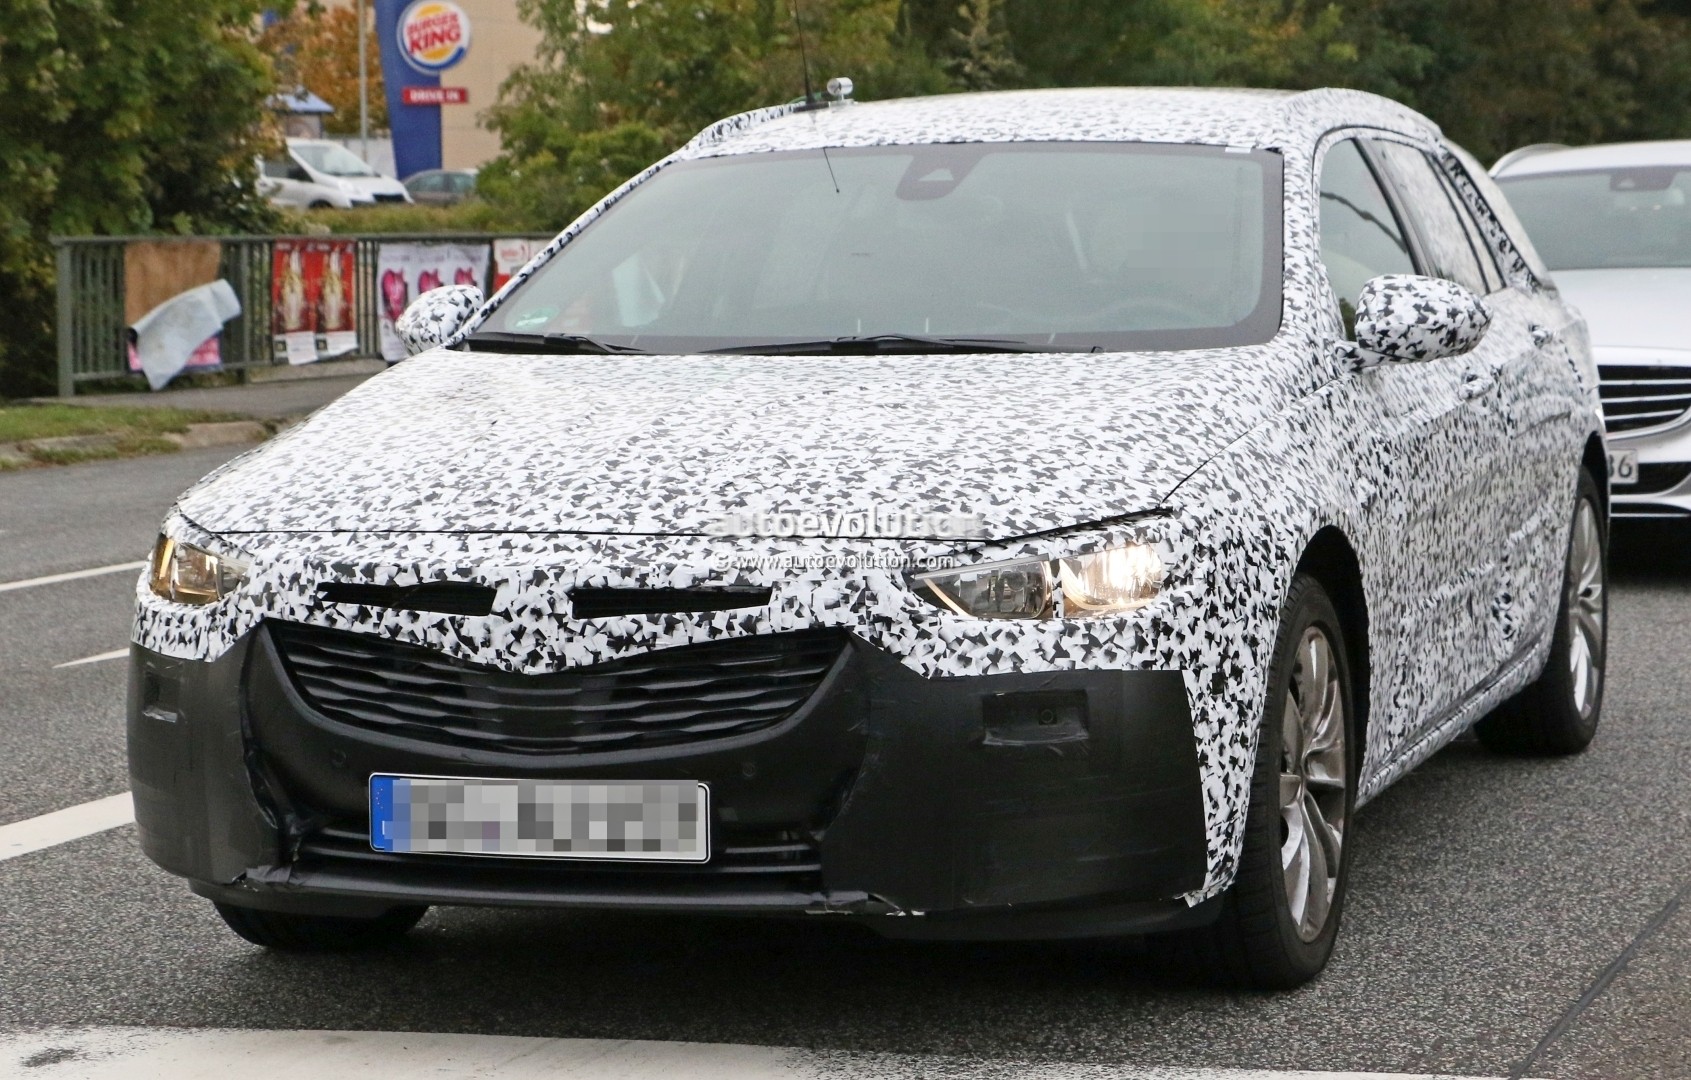 2017 - [Opel] Insignia Grand Sport [E2JO] - Page 17 Opel-insignia-grand-sports-tourer-spied-up-may-come-to-us-as-buick-regal-wagon_1